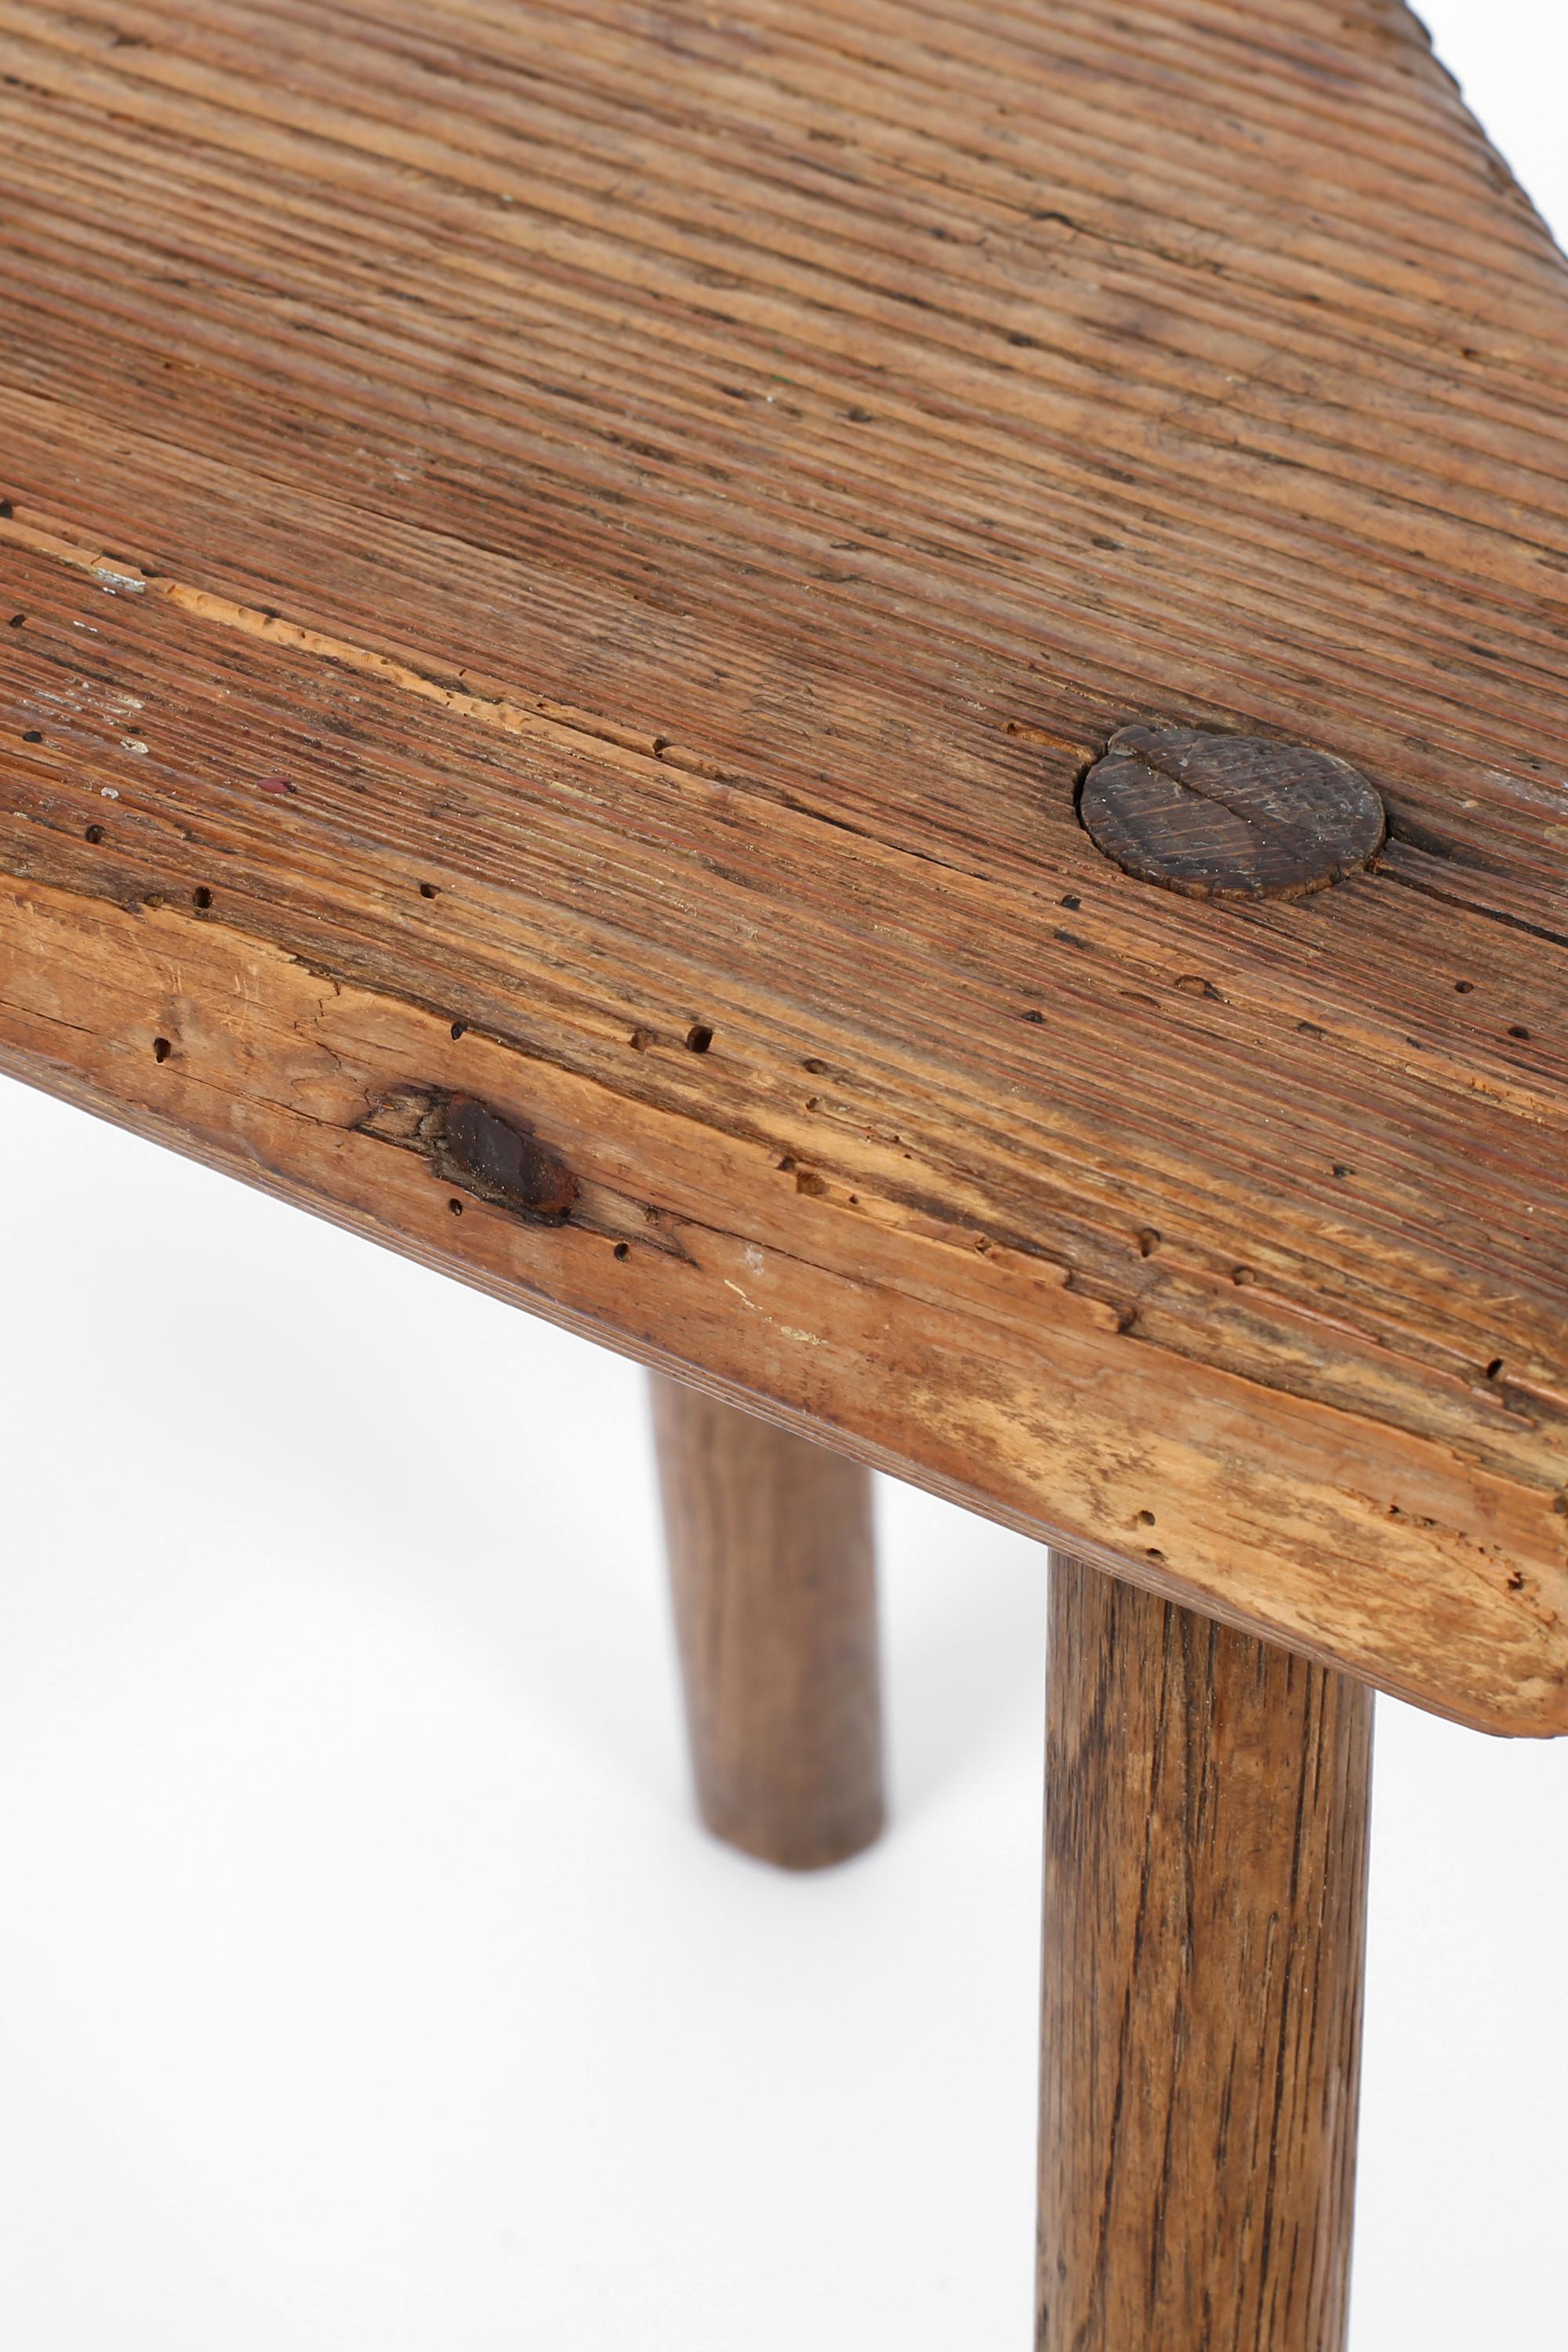 18th Century and Earlier 18th Century Elm Milking Stool, English, c. 1750